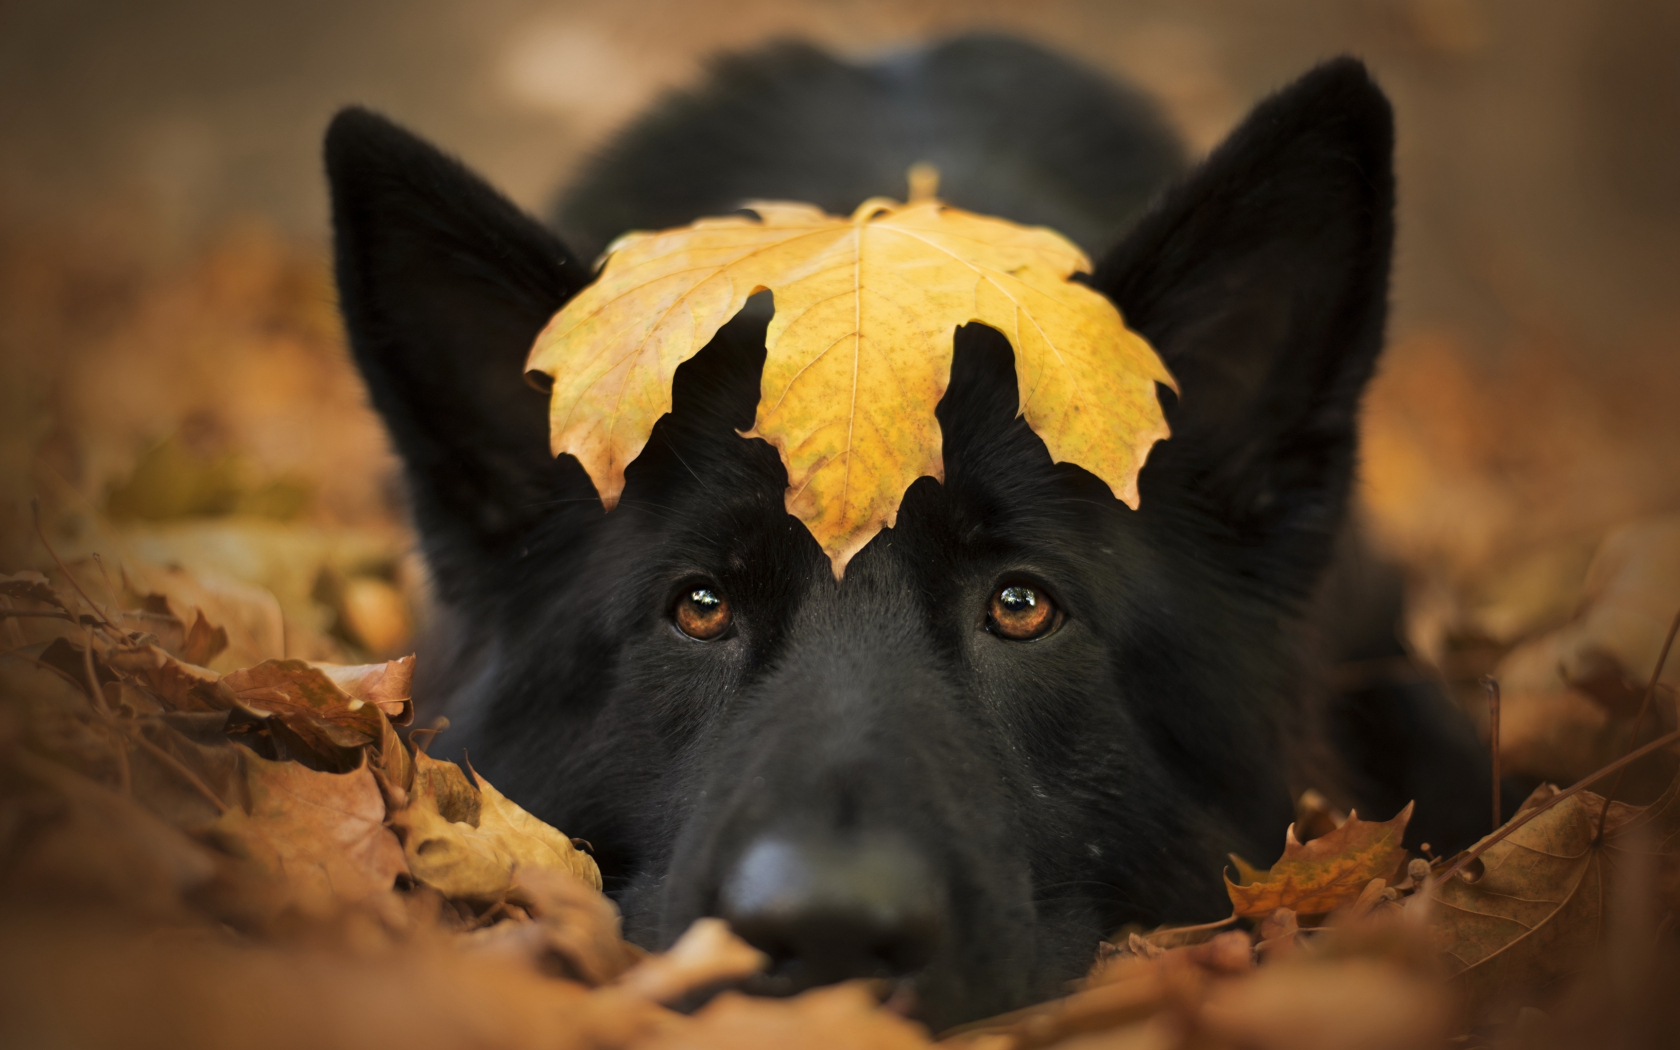 Dog and autumn, cute stare, close up, 1680x1050 wallpaper